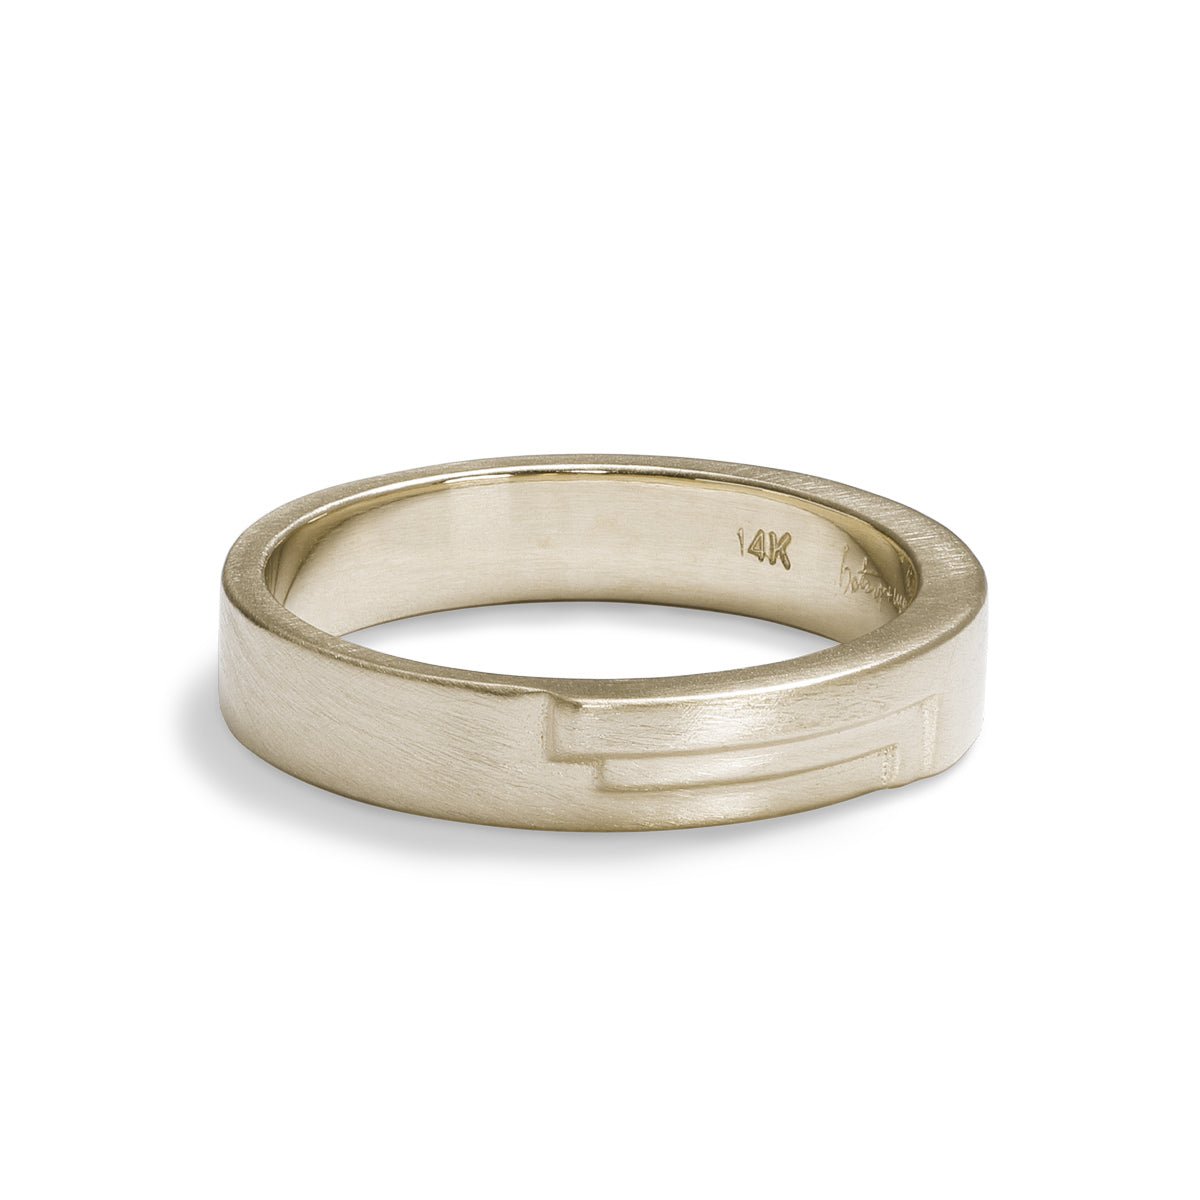 Wide band Vitae ring. Features modern geometric stepped design in recycled 14K white gold. Designed and crafted in Portland, Oregon.